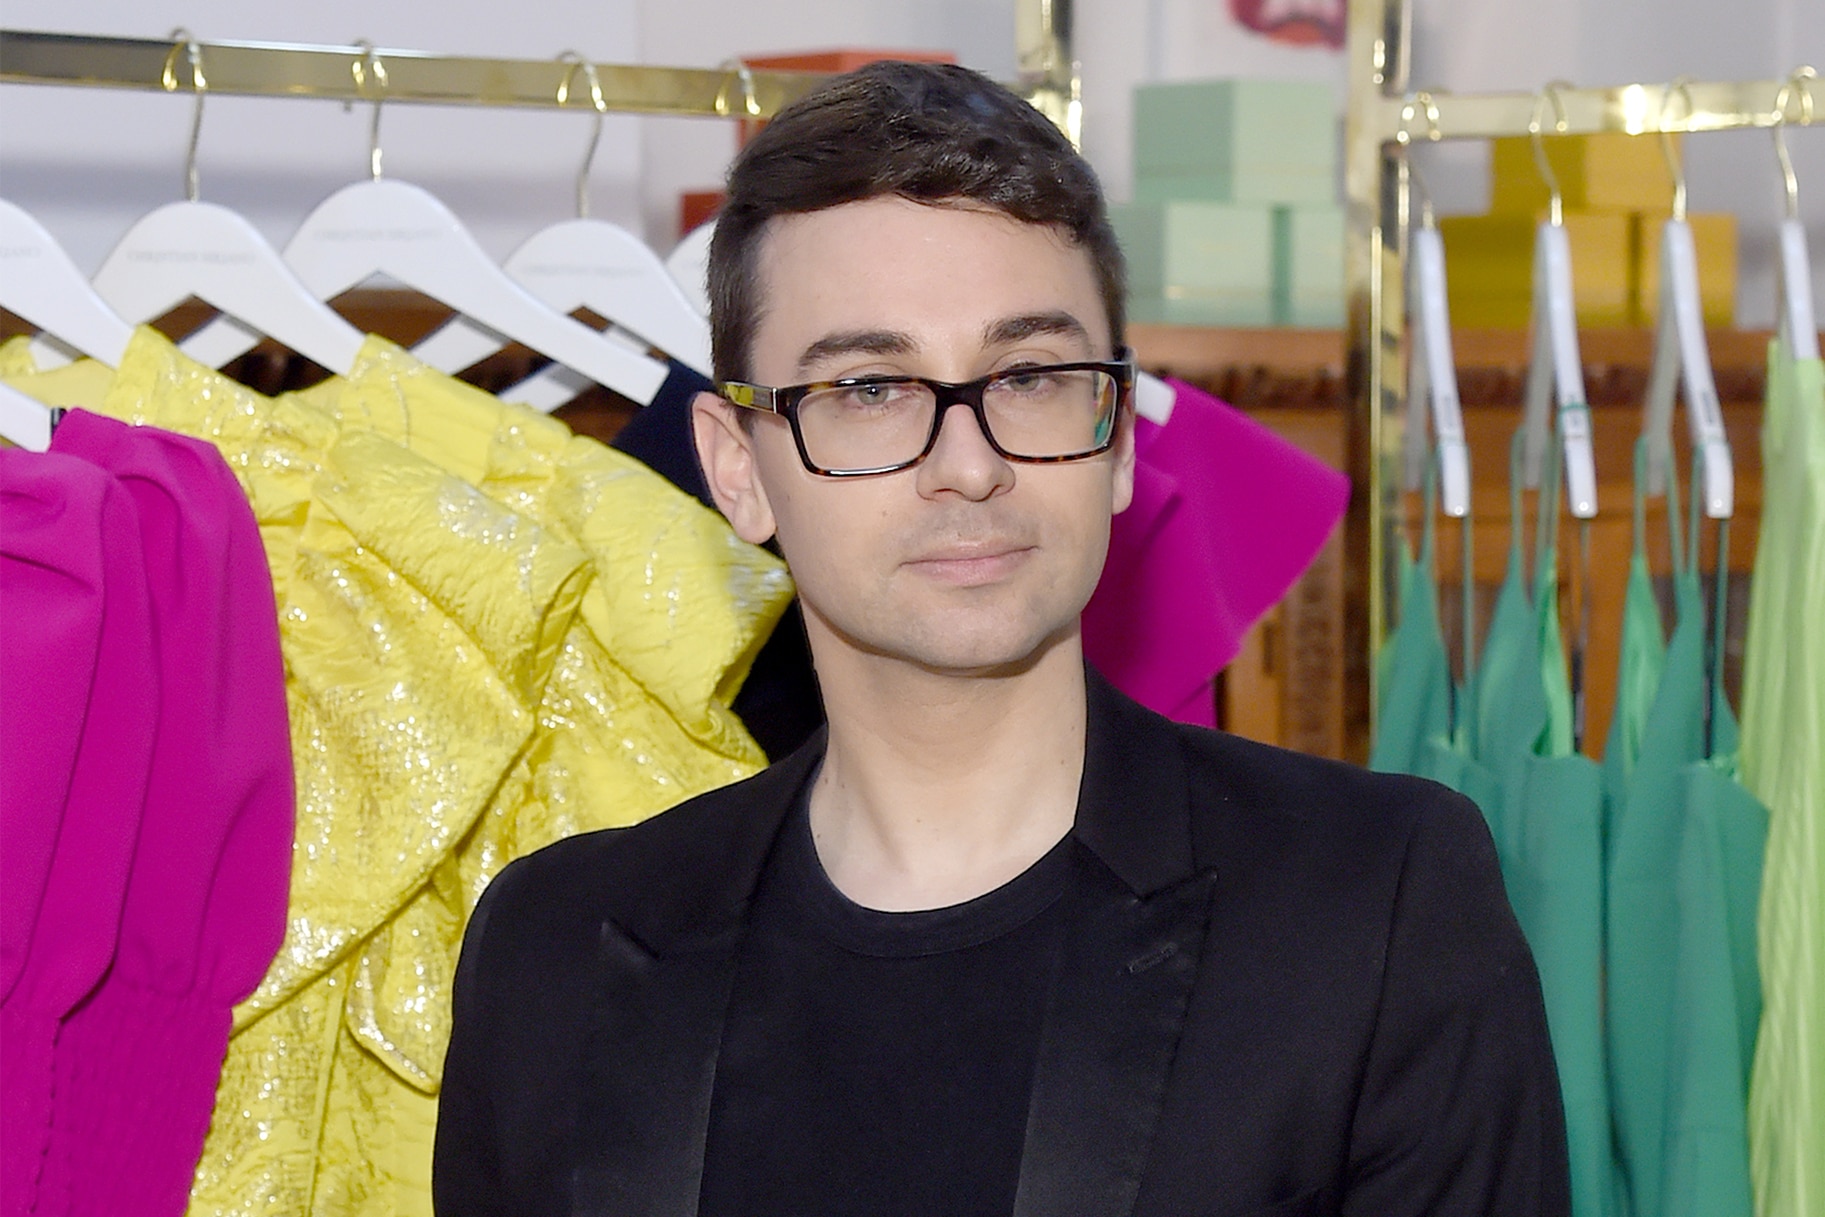 Christian Siriano Shows His Outdoor Balcony at Home | Style & Living